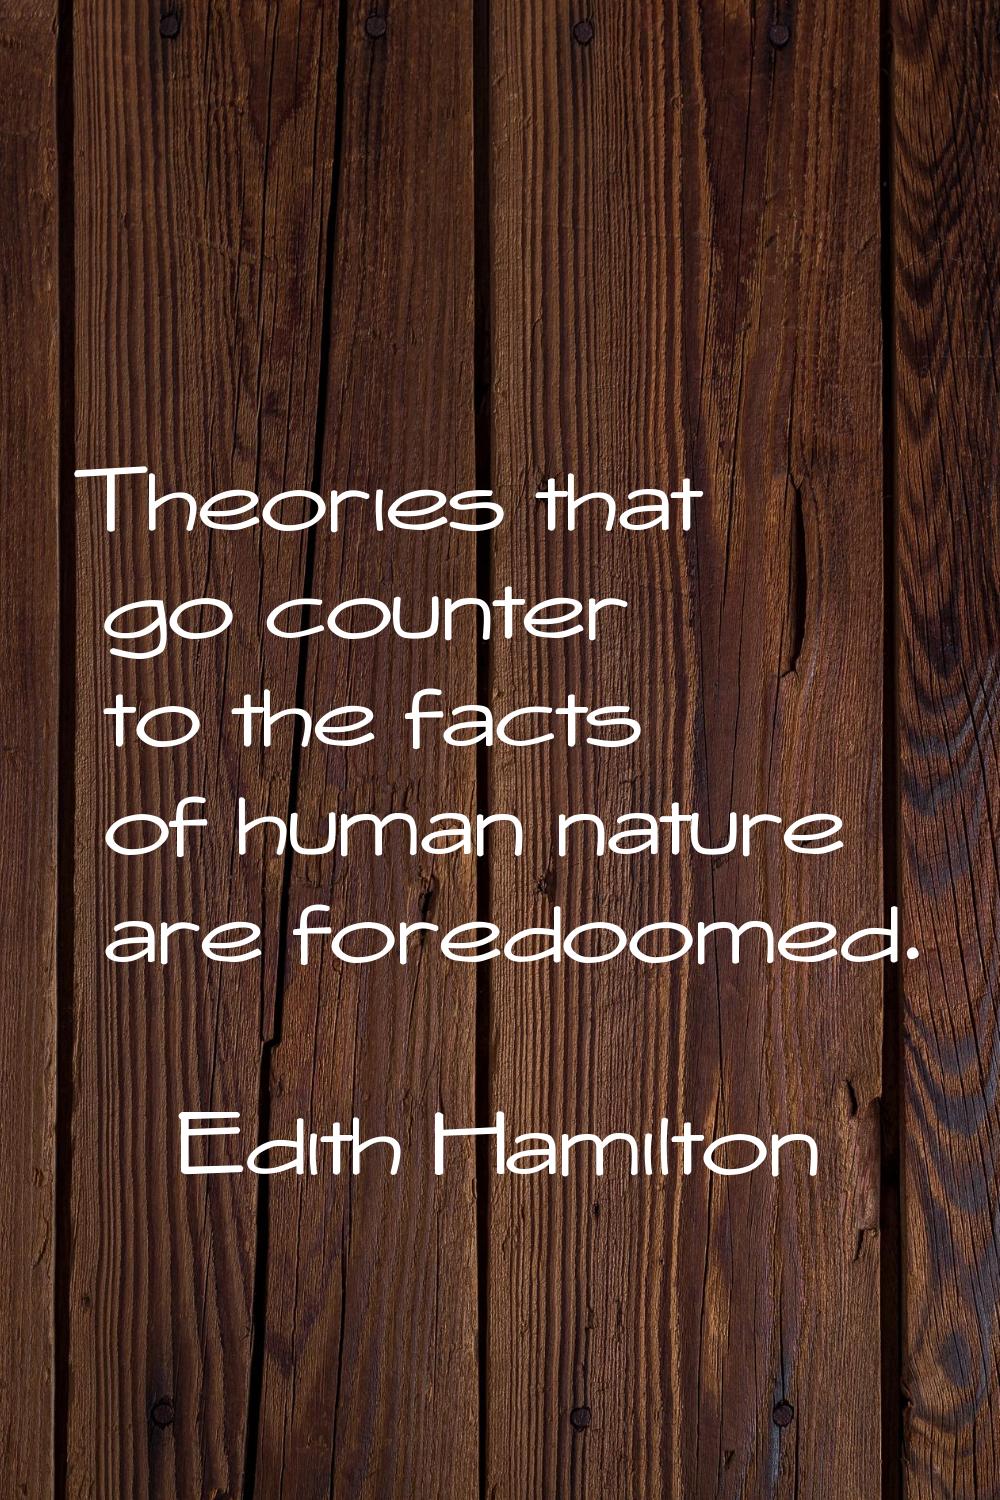 Theories that go counter to the facts of human nature are foredoomed.